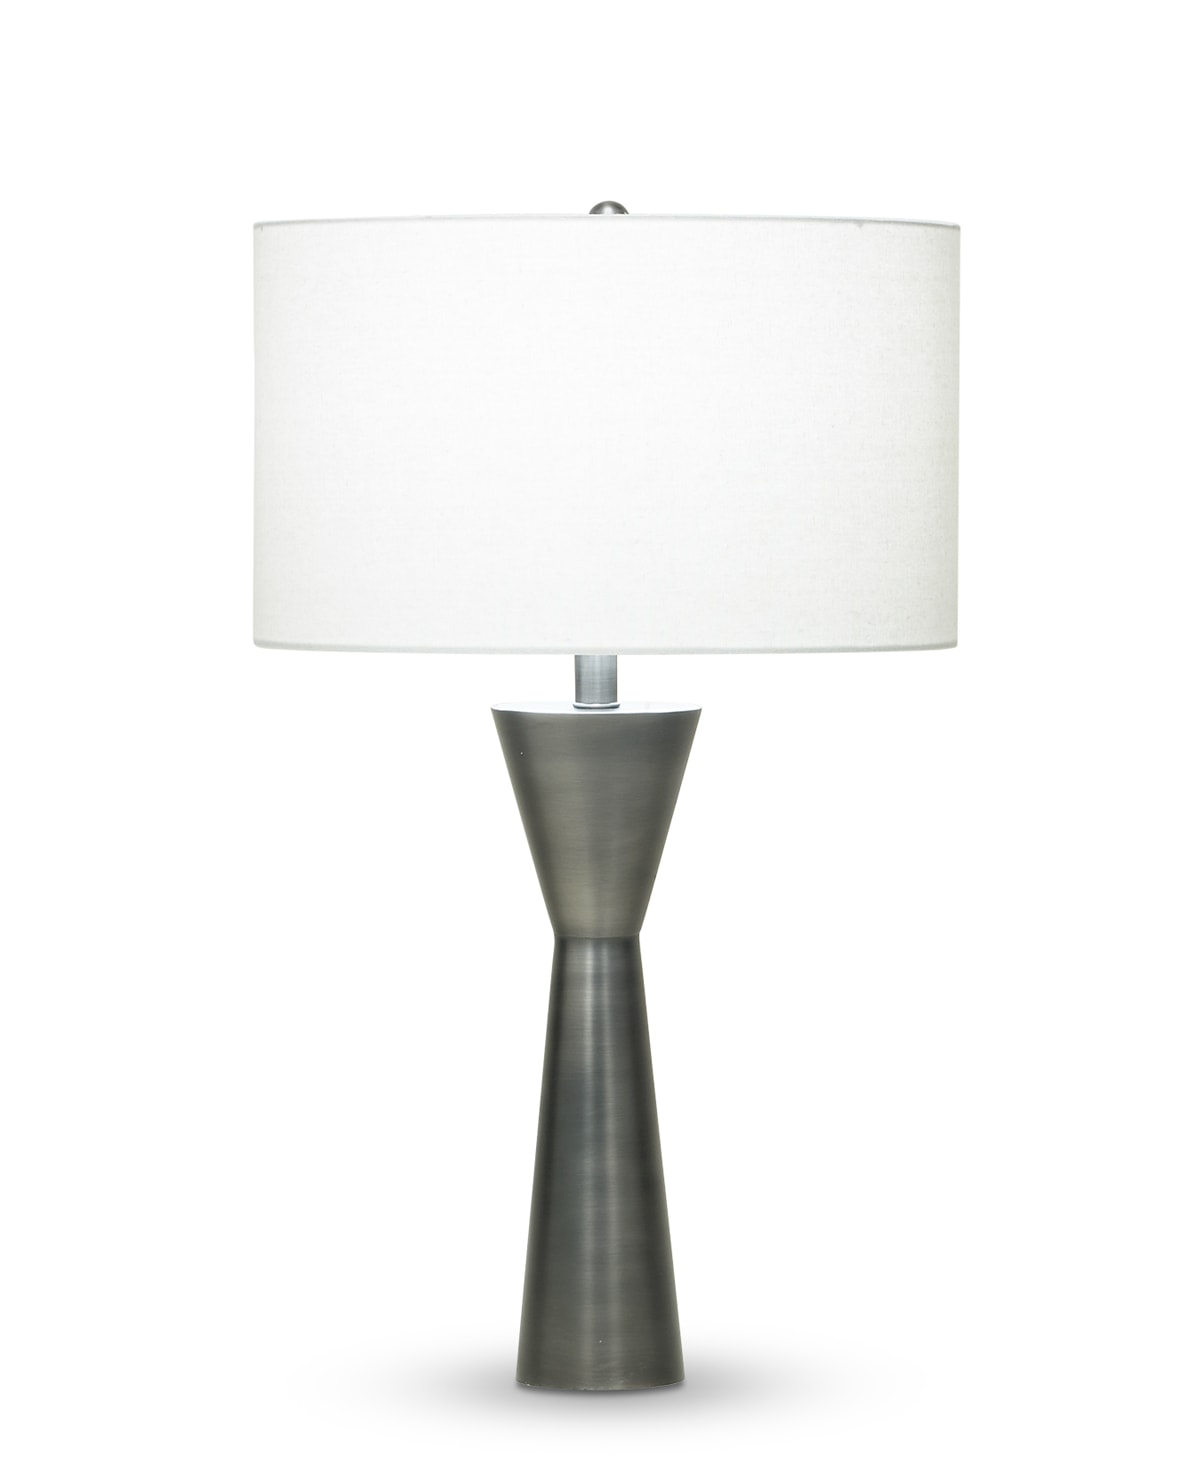 FlowDecor Dark Essex Table Lamp in metal with antique black finish and off-white linen drum shade (# 3801)